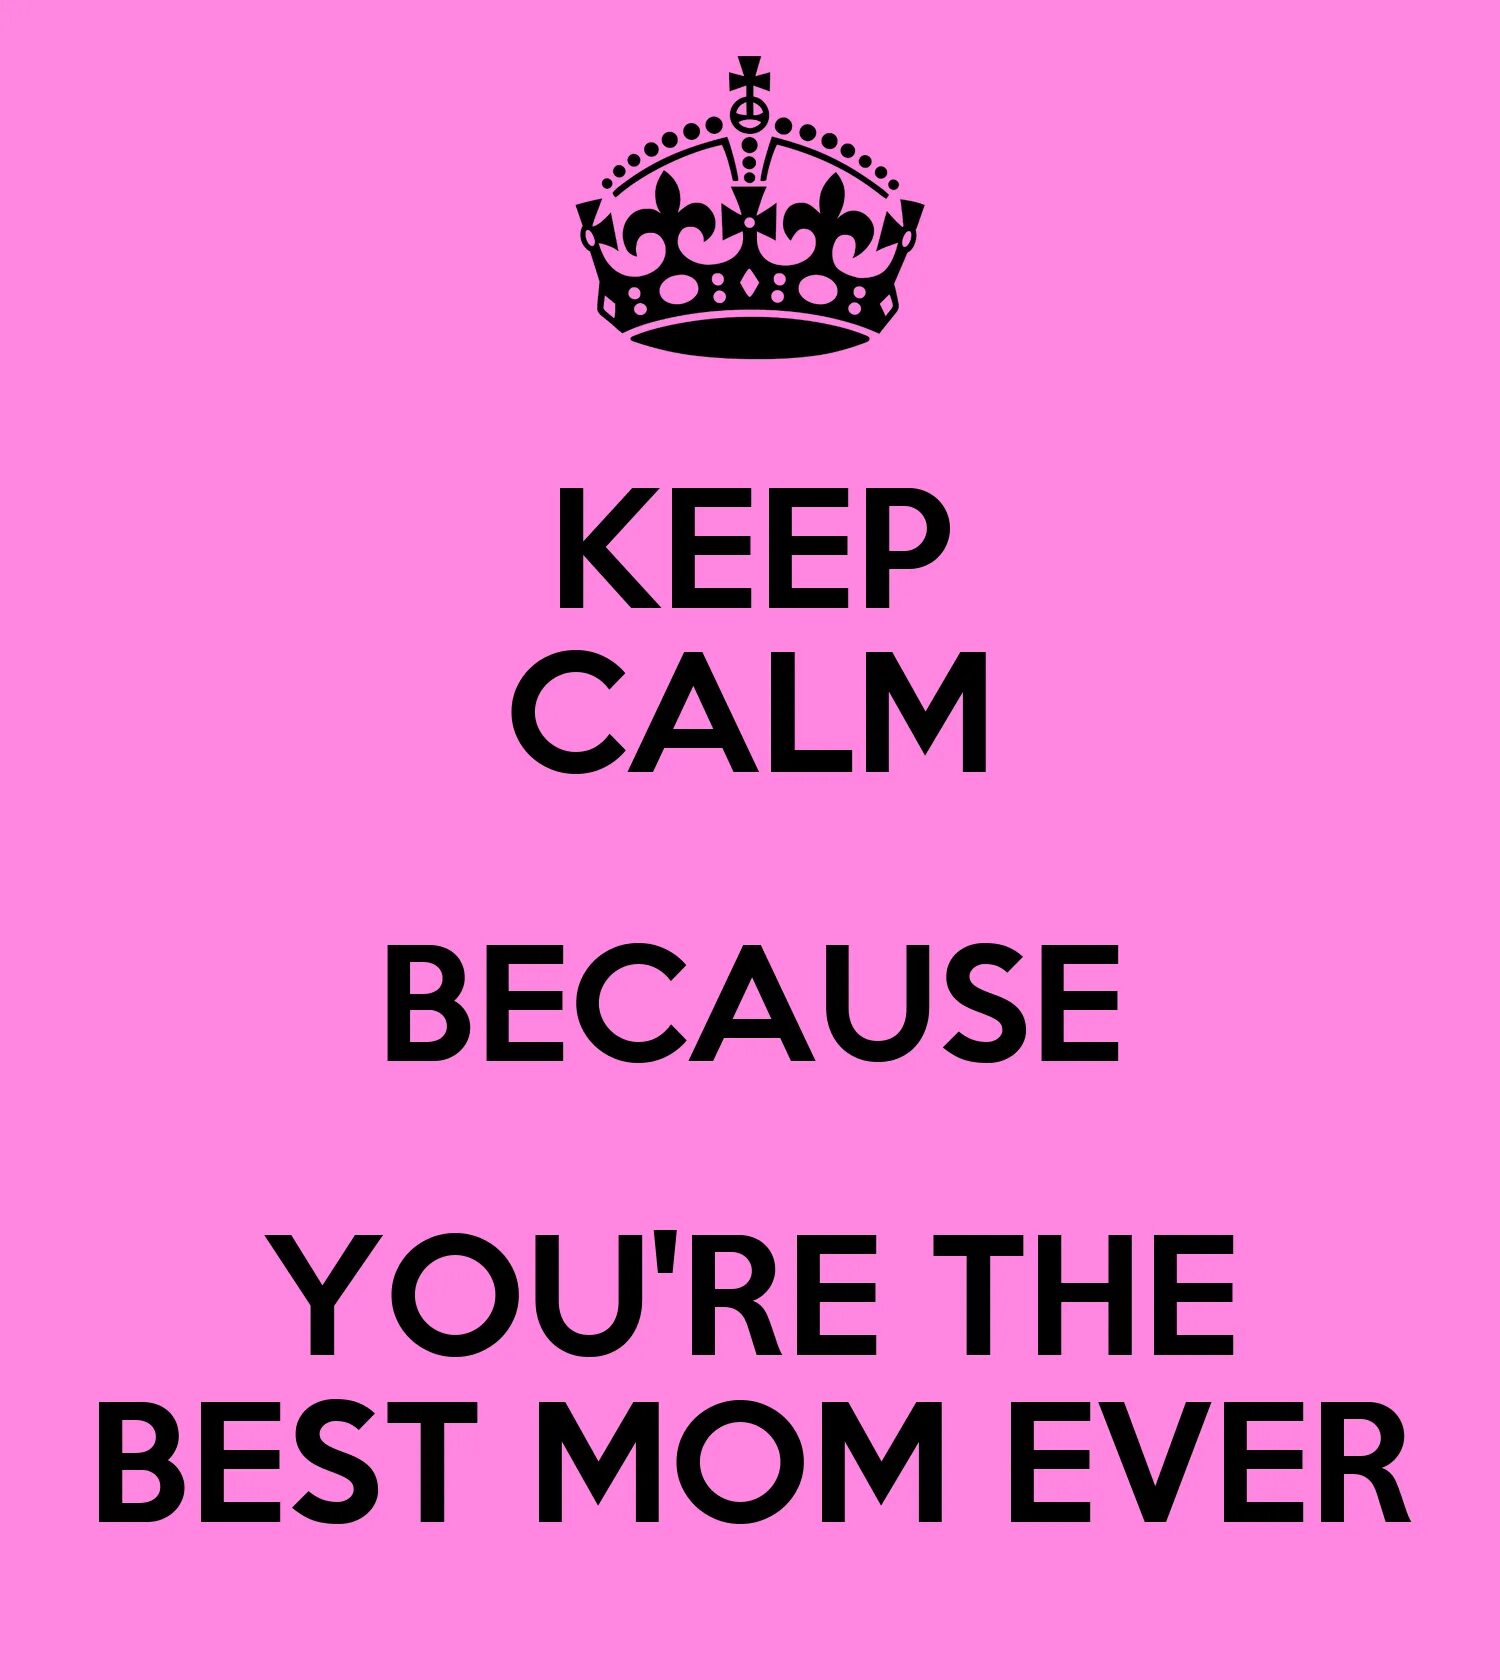 Best mother. Best mom ever. Best quotes ever. Keep Calm mom.